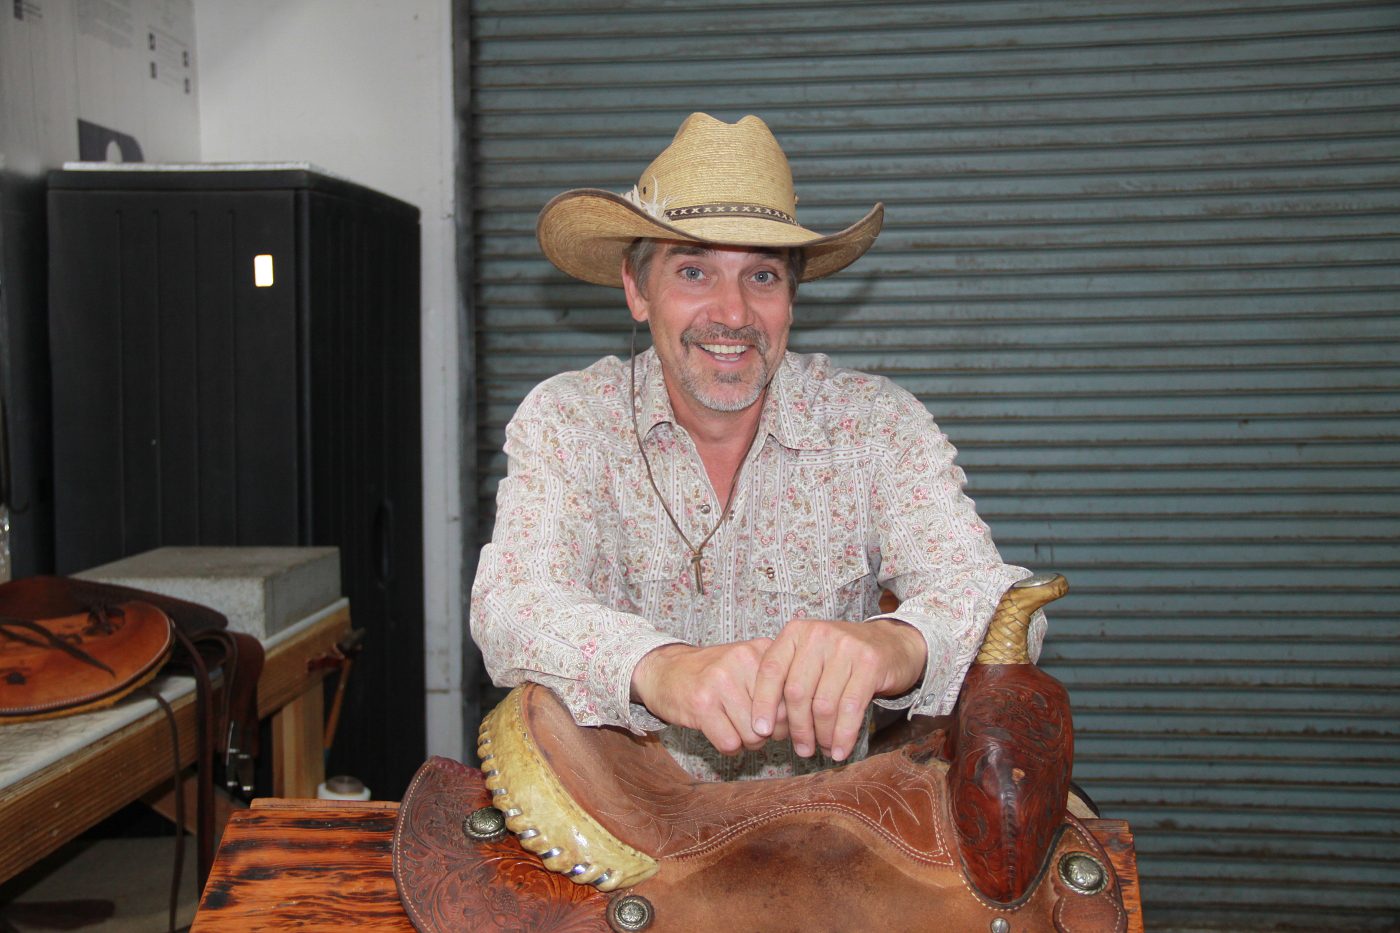 Valley saddle maker gains some fame over name confusion